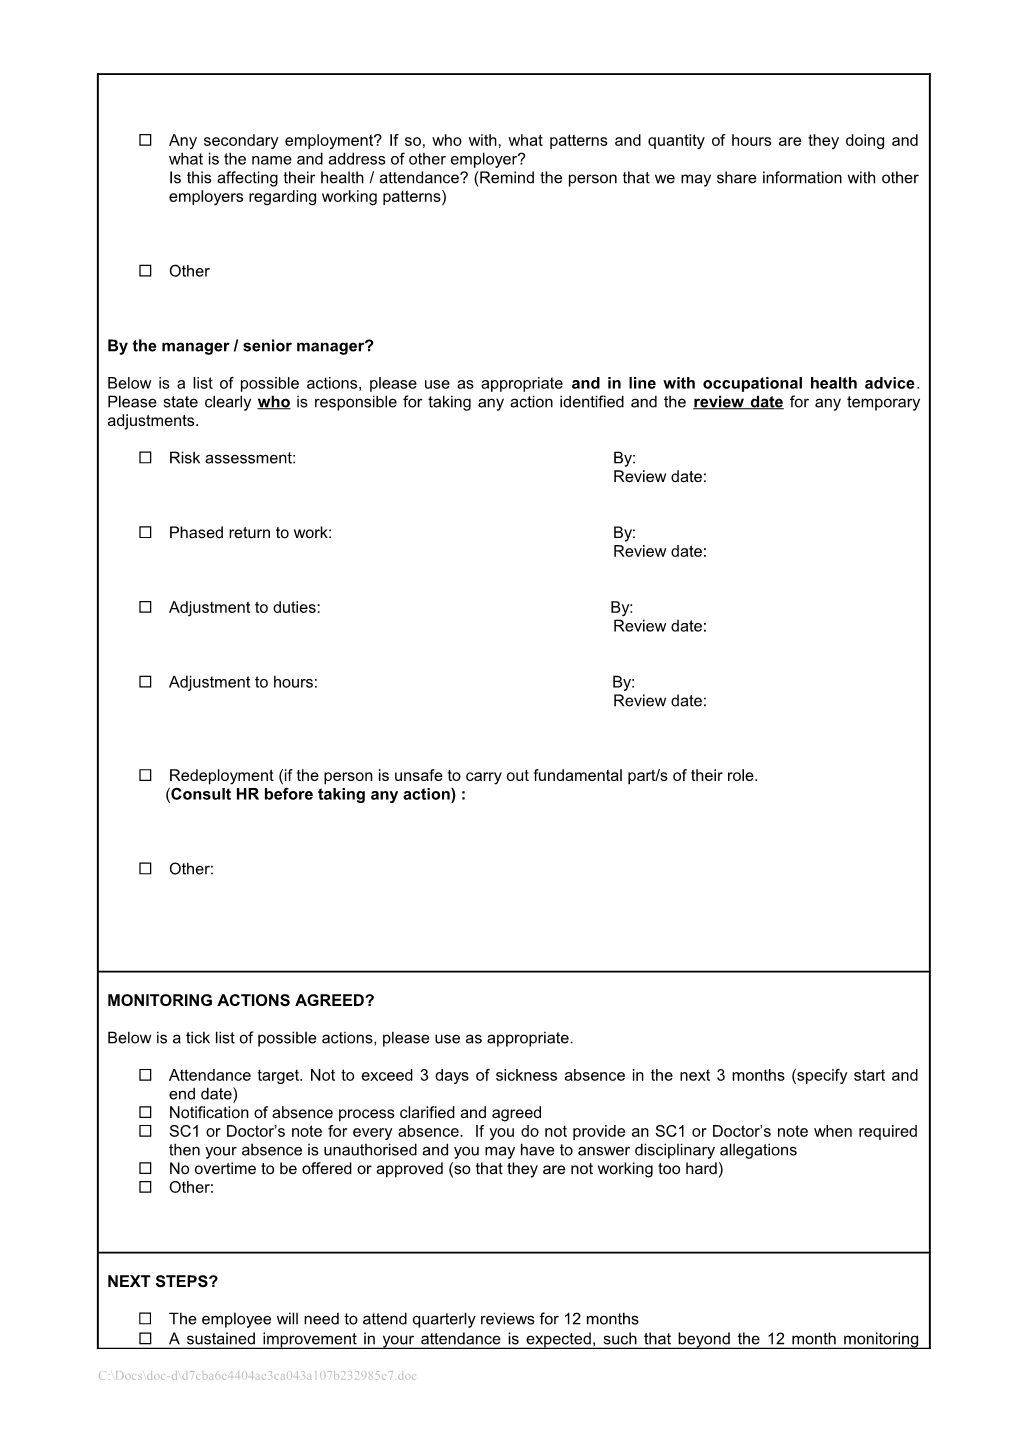 Sickness Form Target Setting / Sickness Form - Review